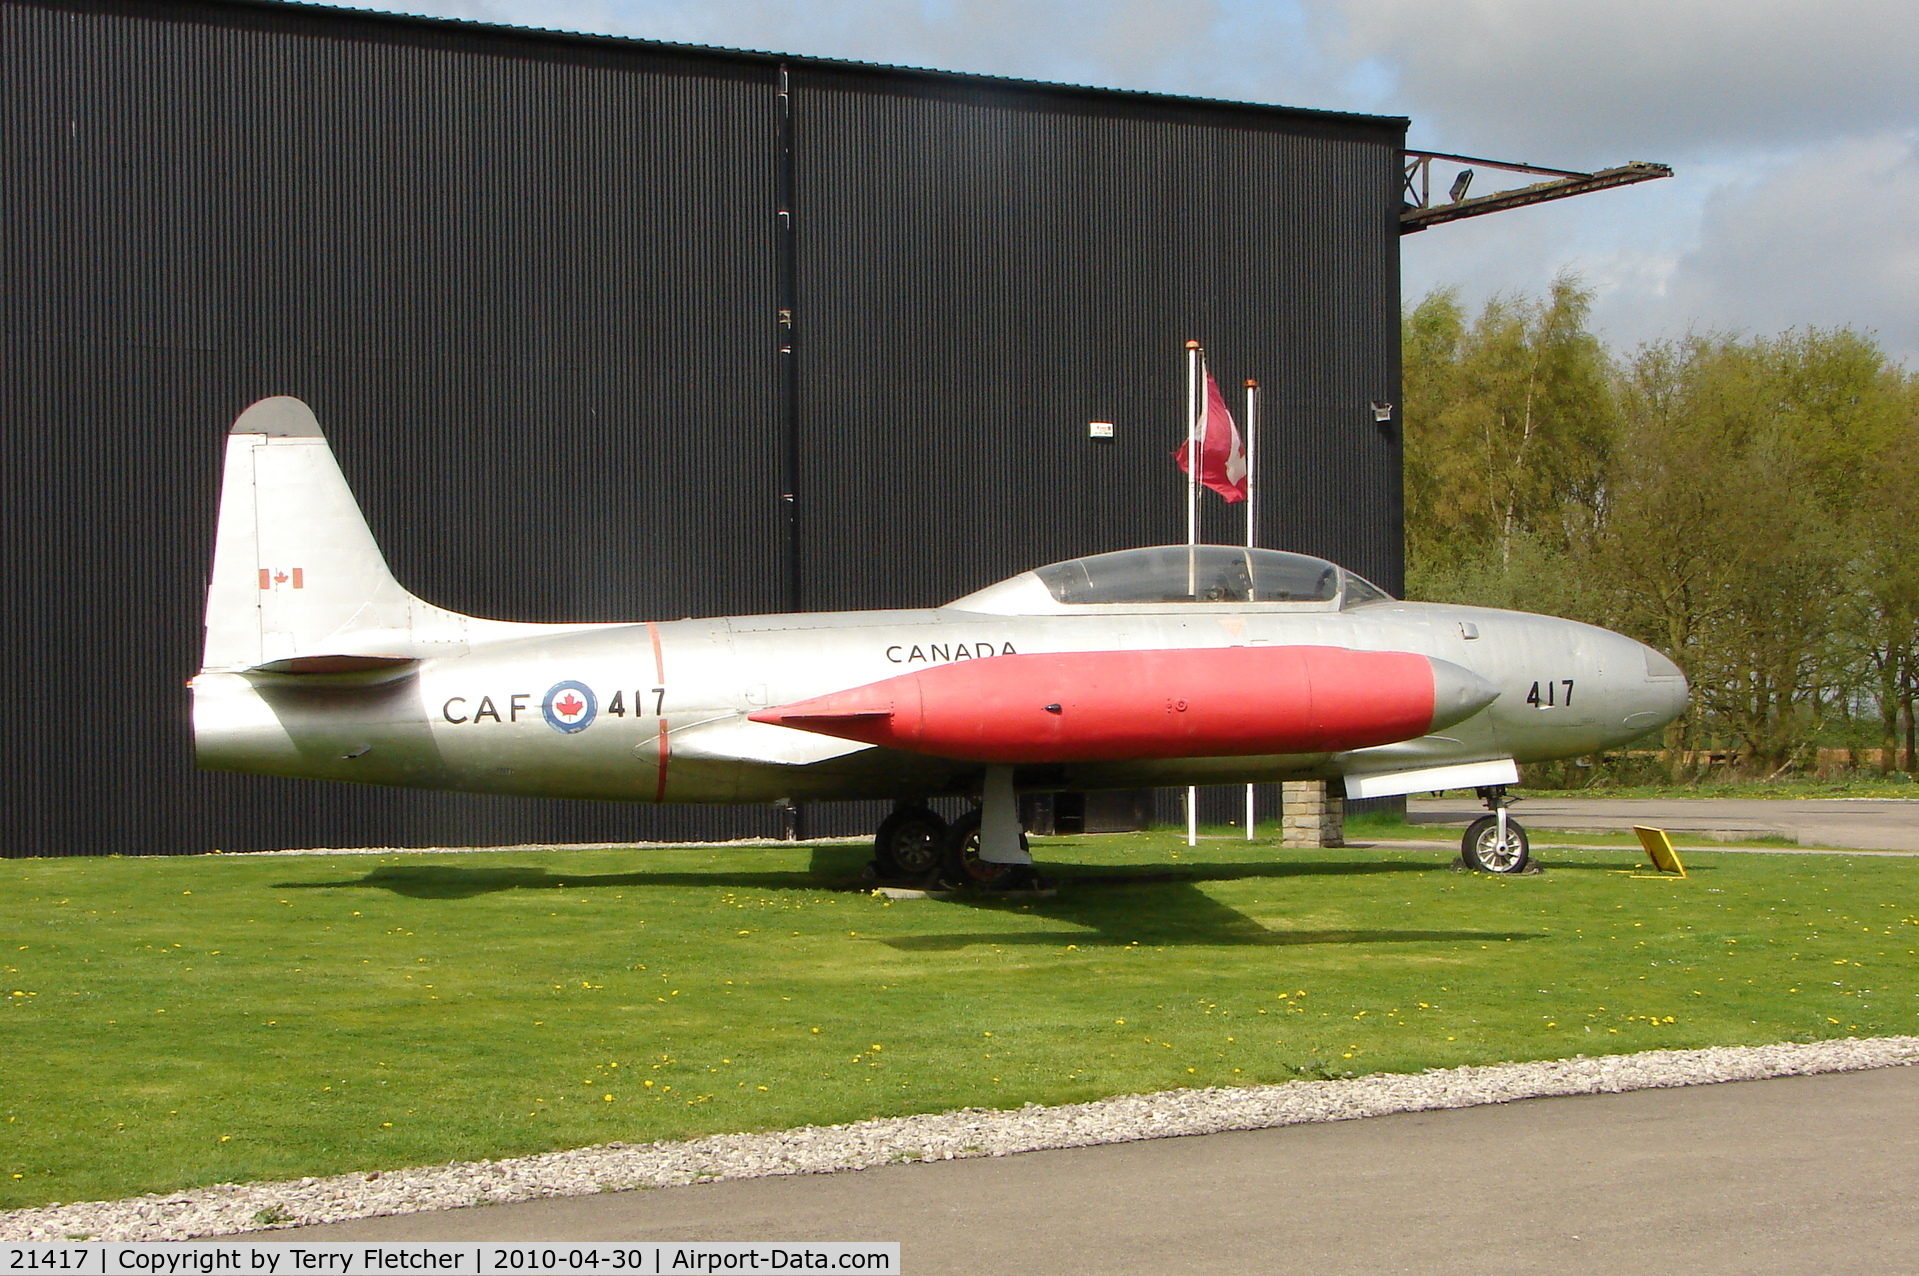 21417, Canadair CT-133 Silver Star 3 C/N T33-417, Canadair CT-133AN displayed at the Yorkshire Air Museum at Elvington